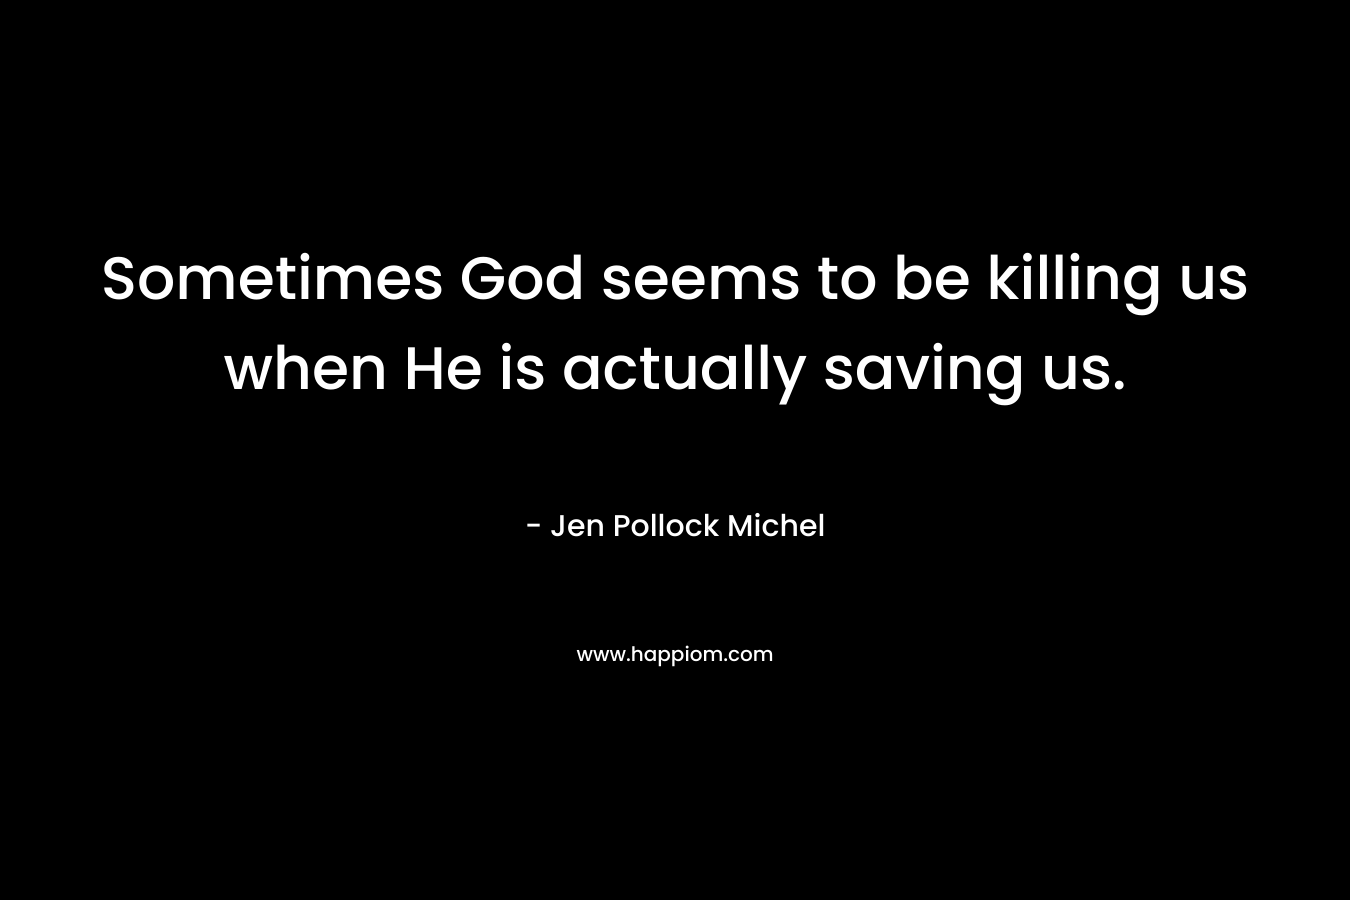 Sometimes God seems to be killing us when He is actually saving us.